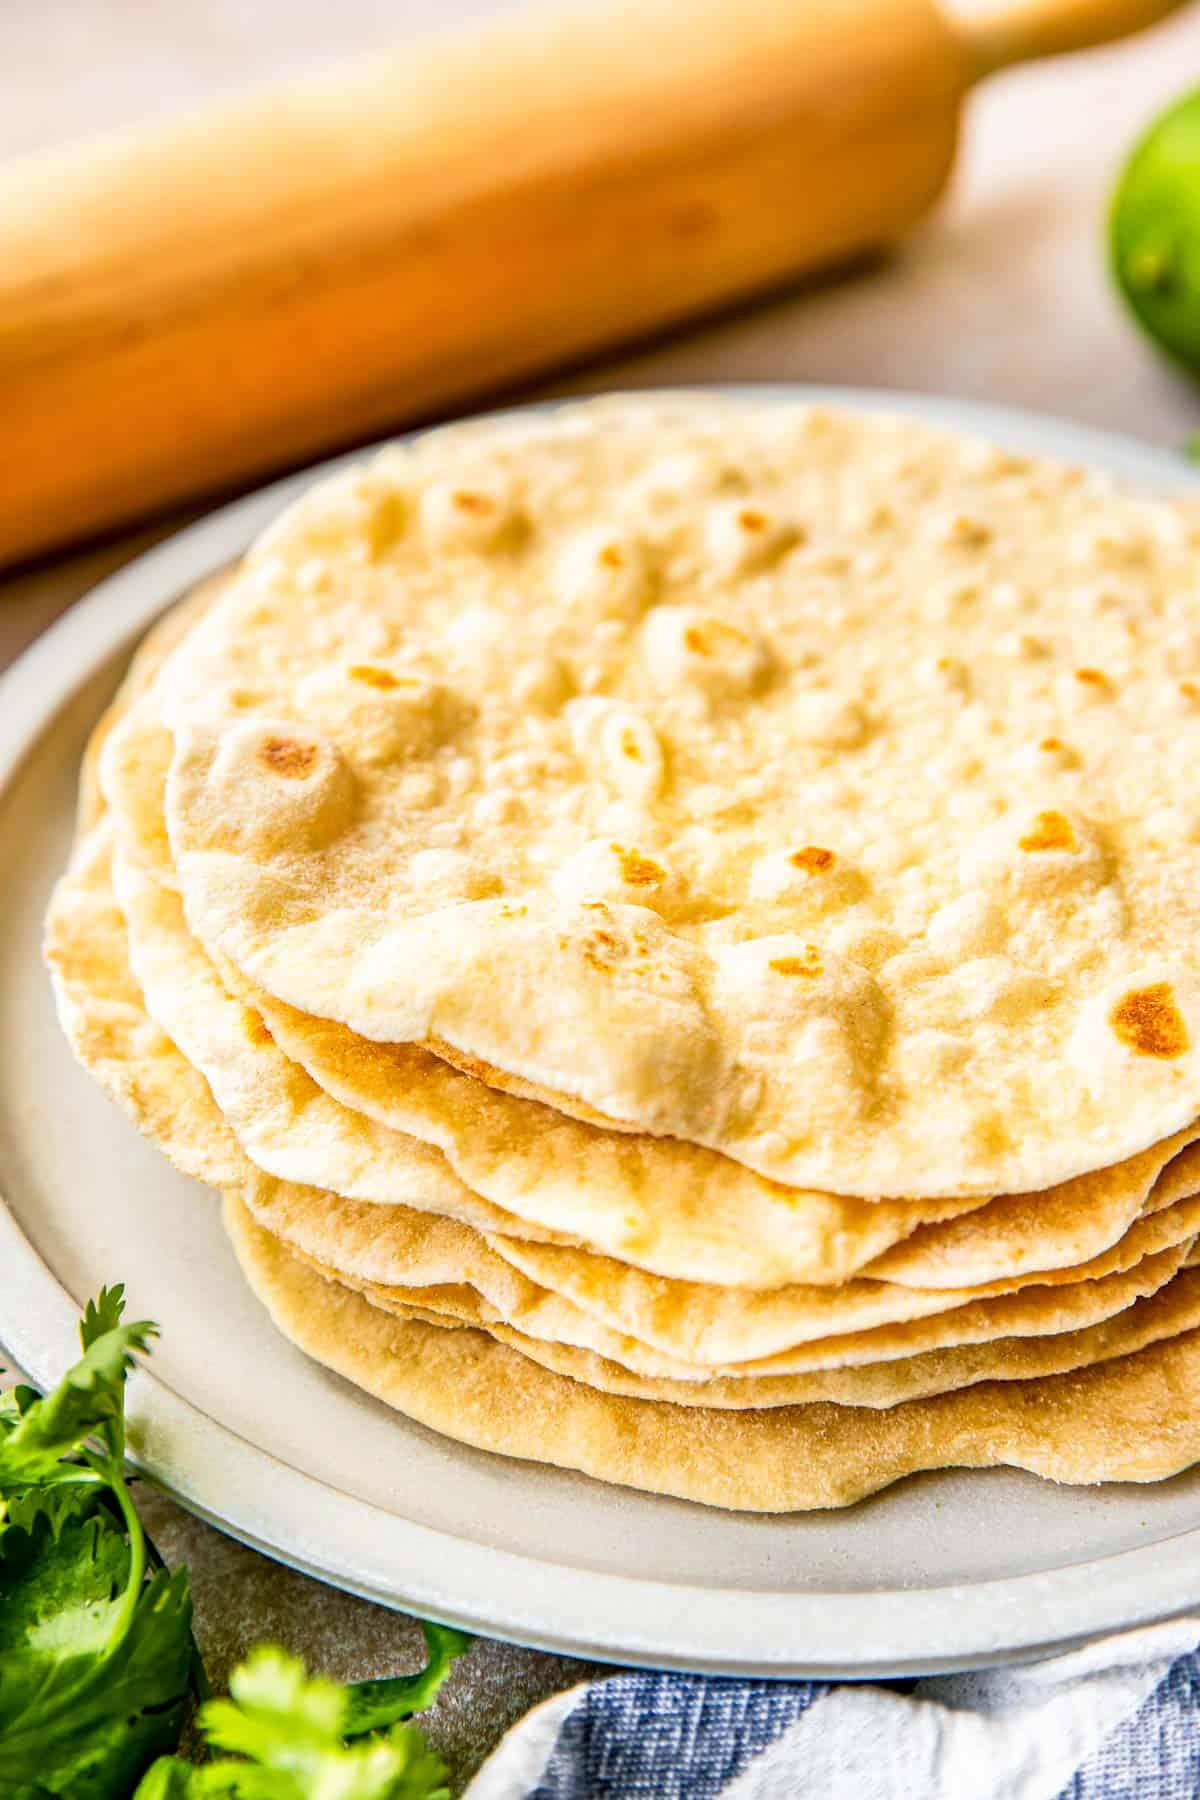 homemade flour tortillas are stacked on a plate